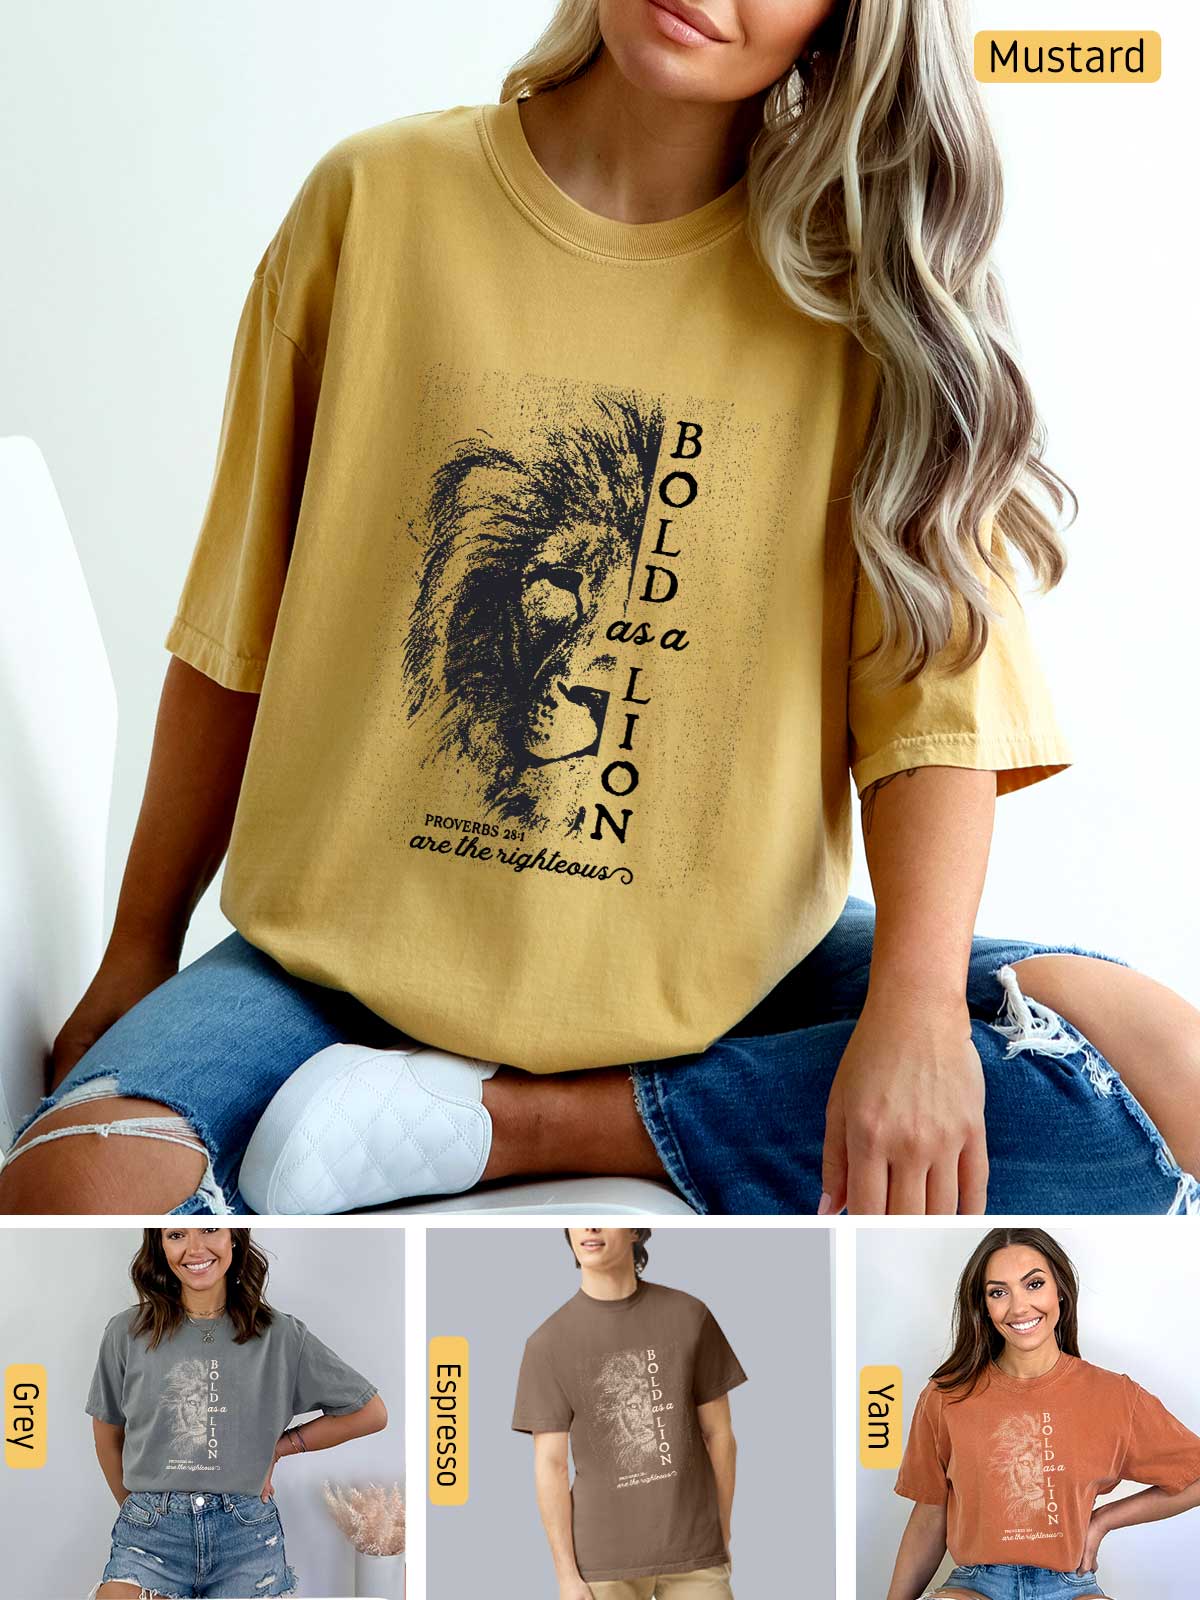 a woman wearing a mustard colored shirt with a lion on it